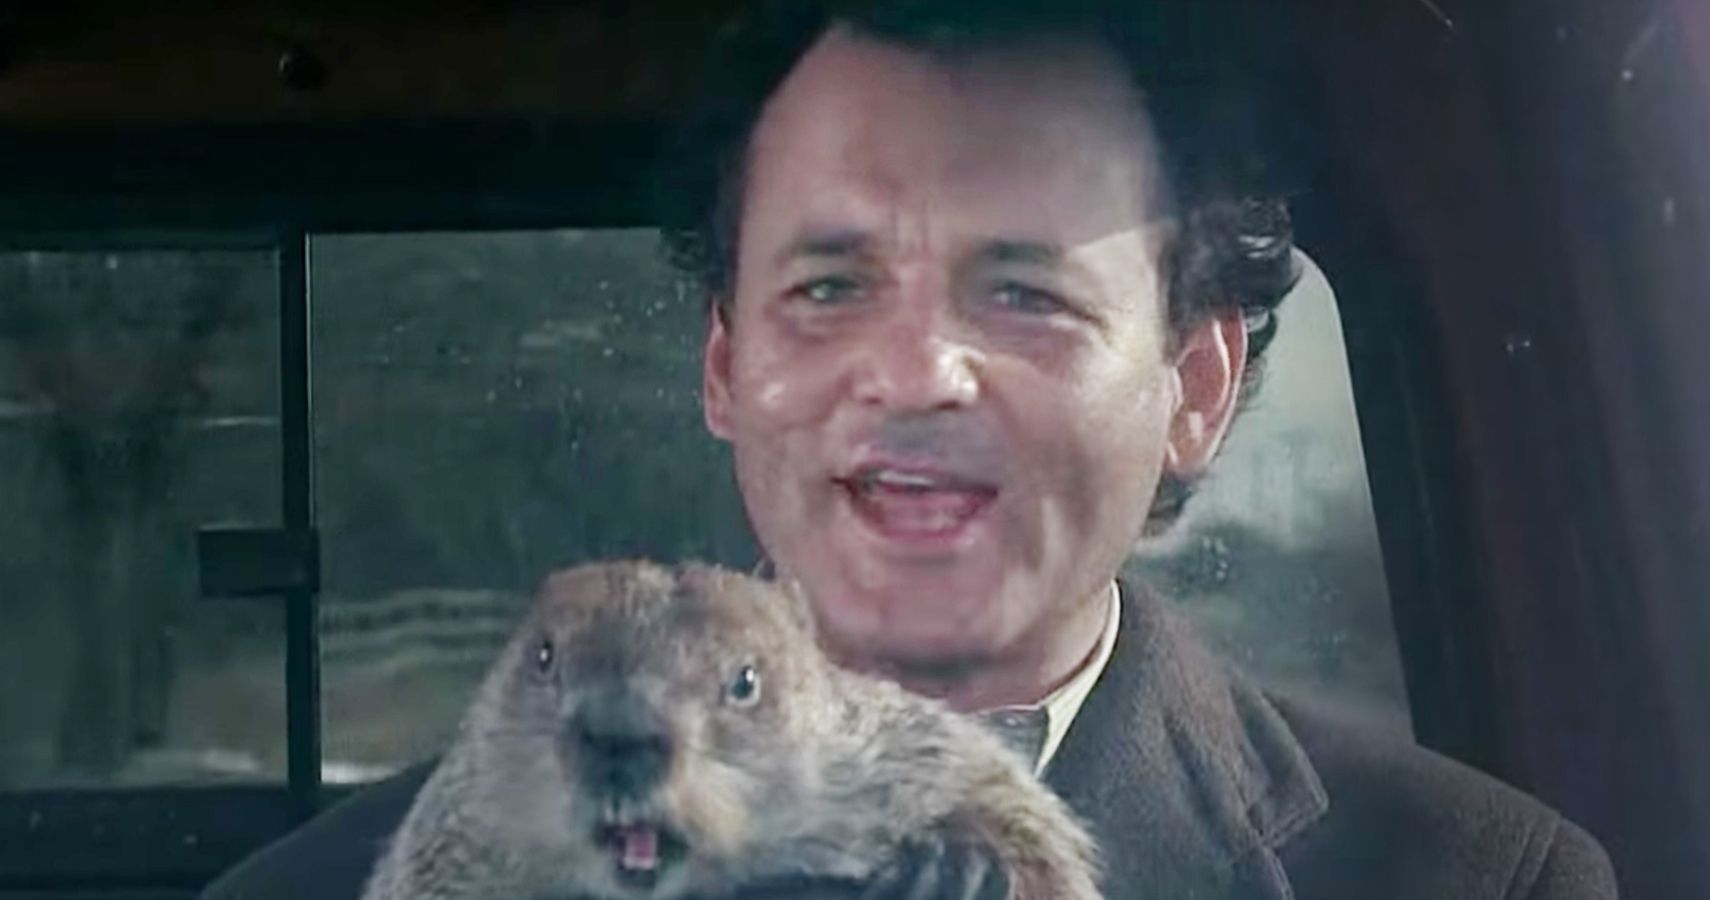 Groundhog Day Gets An Official VR Video Game Sequel